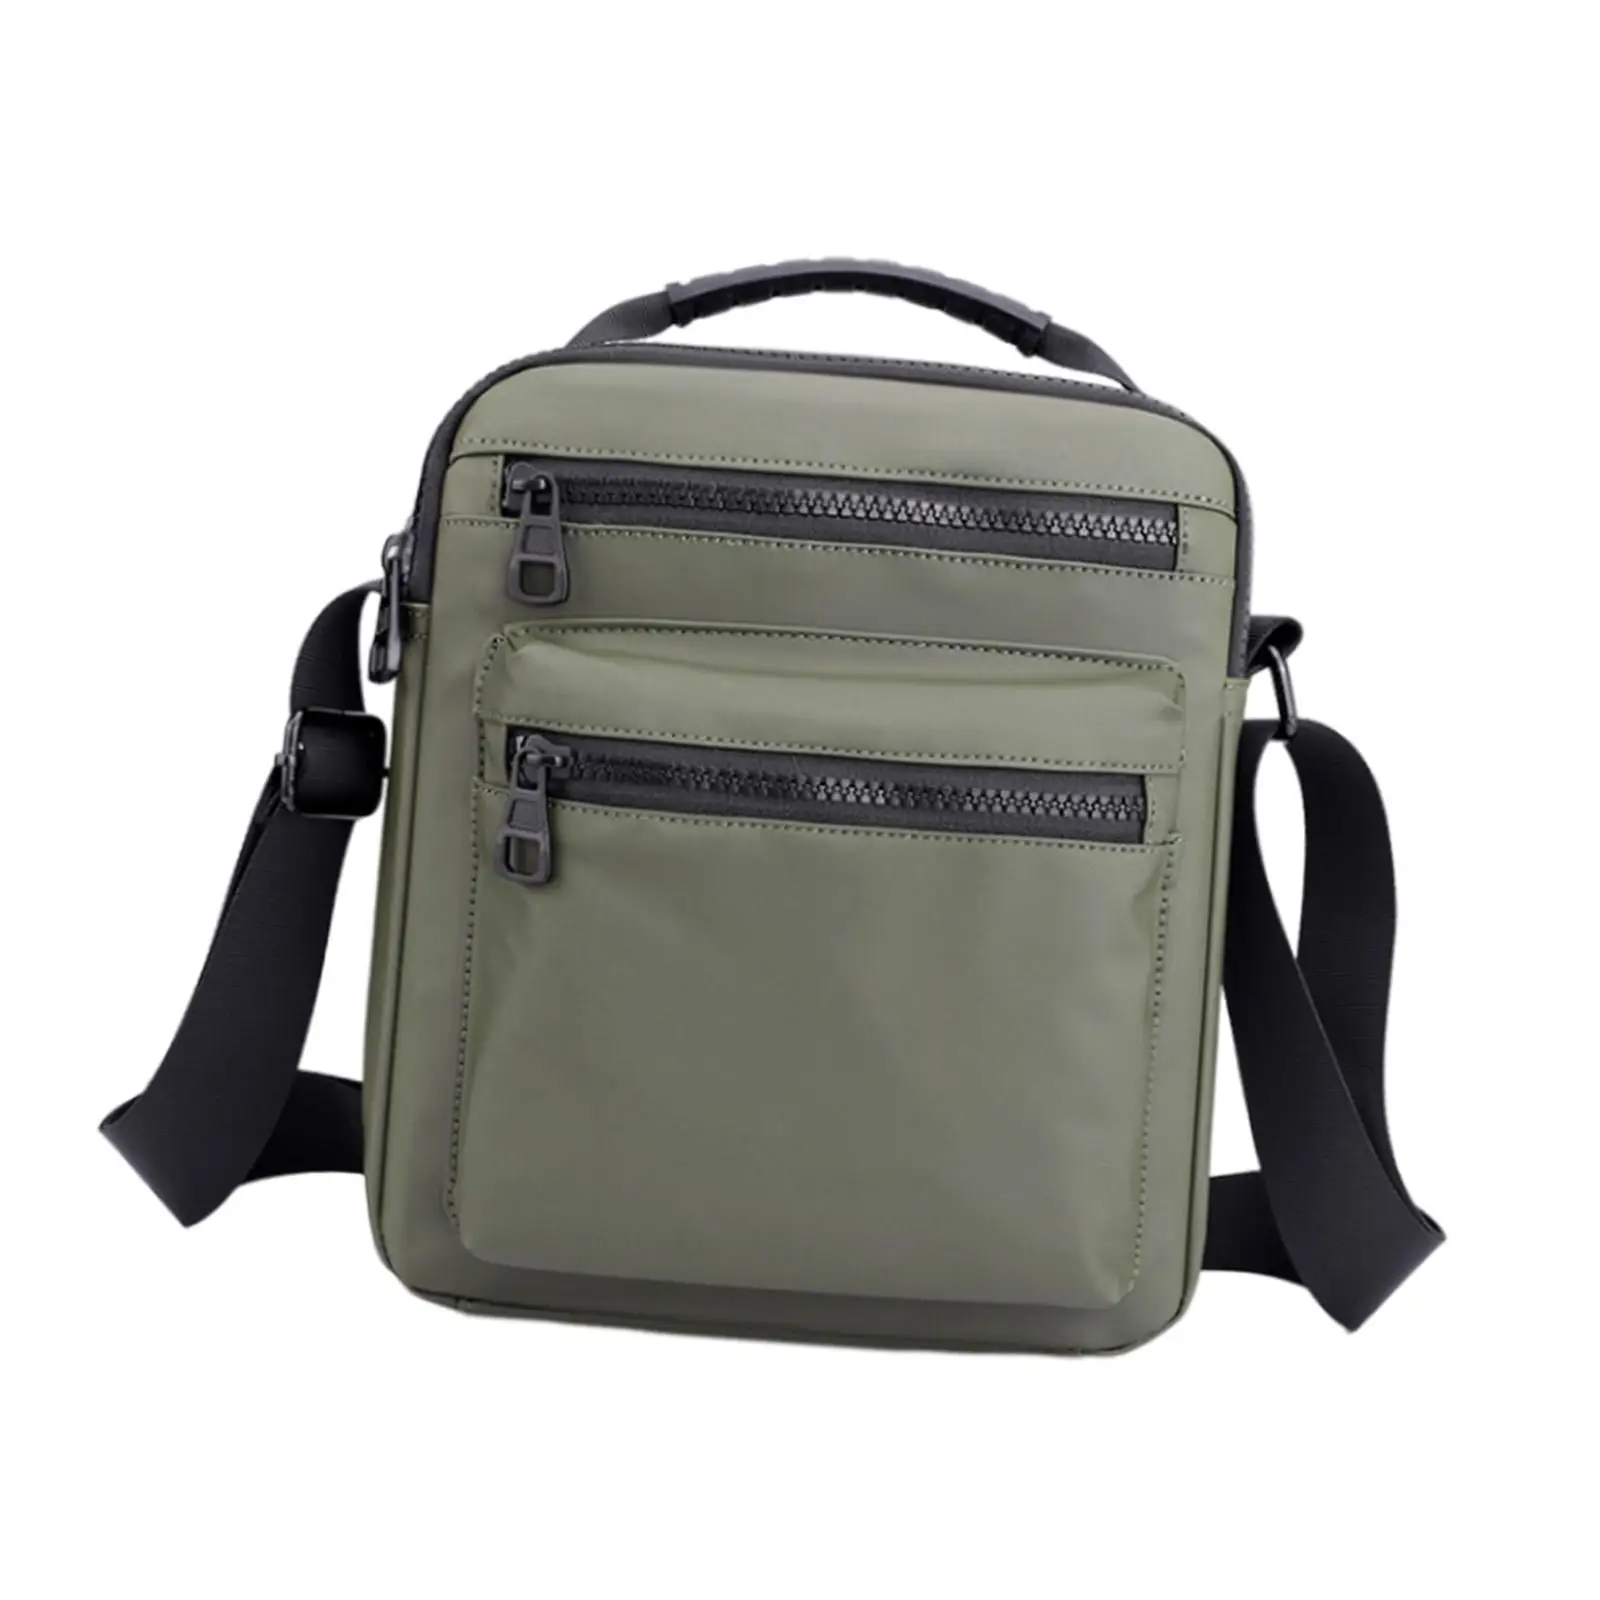 Men`s Messenger Bag with Multiple Pockets Casual Pouch Bag Travel Bag Satchel Bag for Picnic Camping Cycling Office Commute